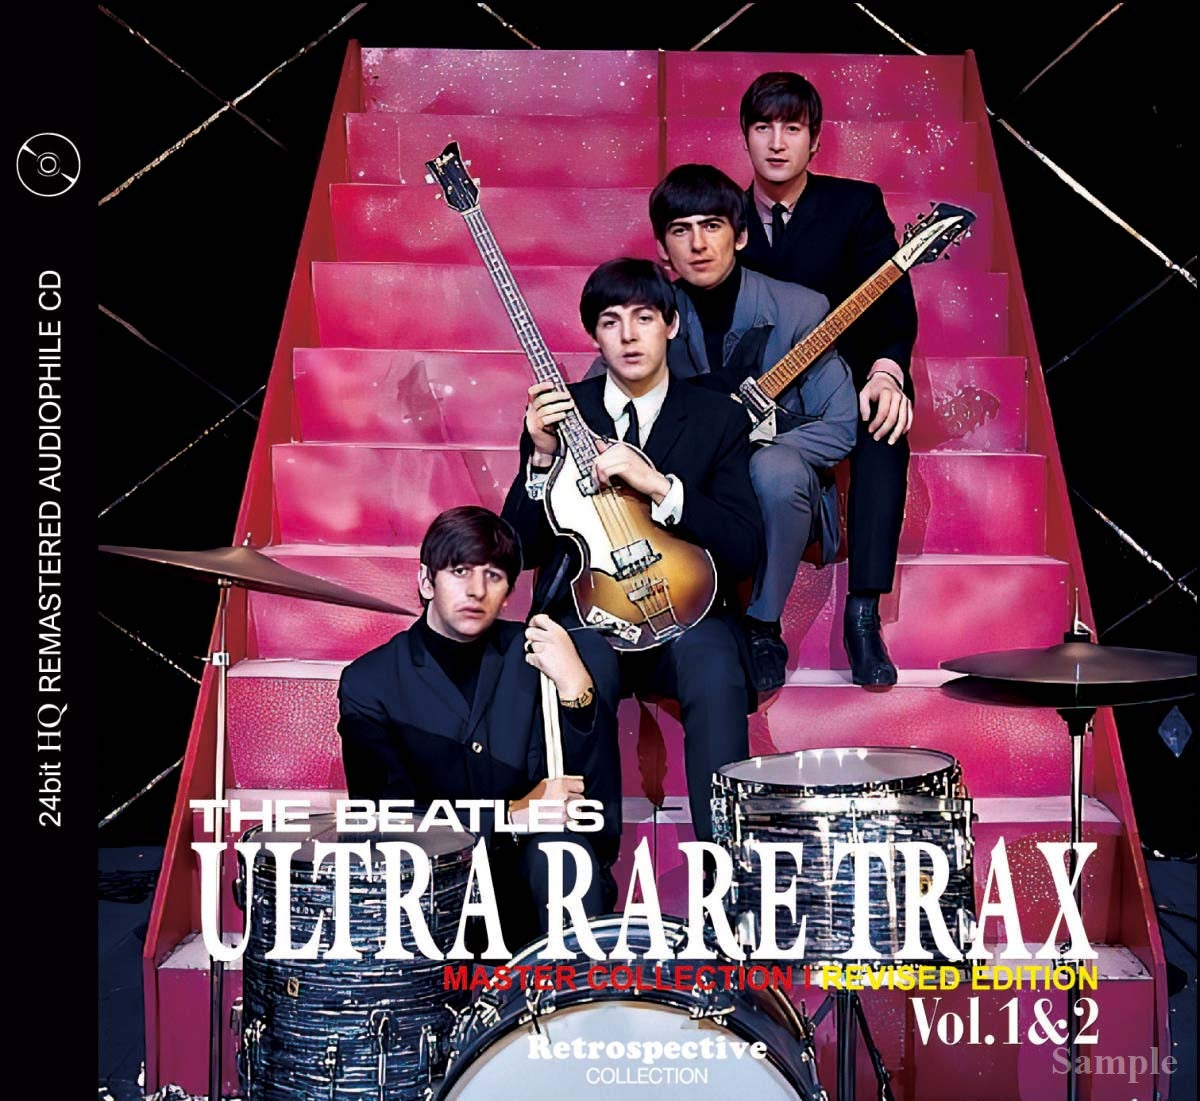 THE BEATLES / ULTRA RARE TRAX - MASTER COLLECTION I : VOL.1&2 (RIVISED